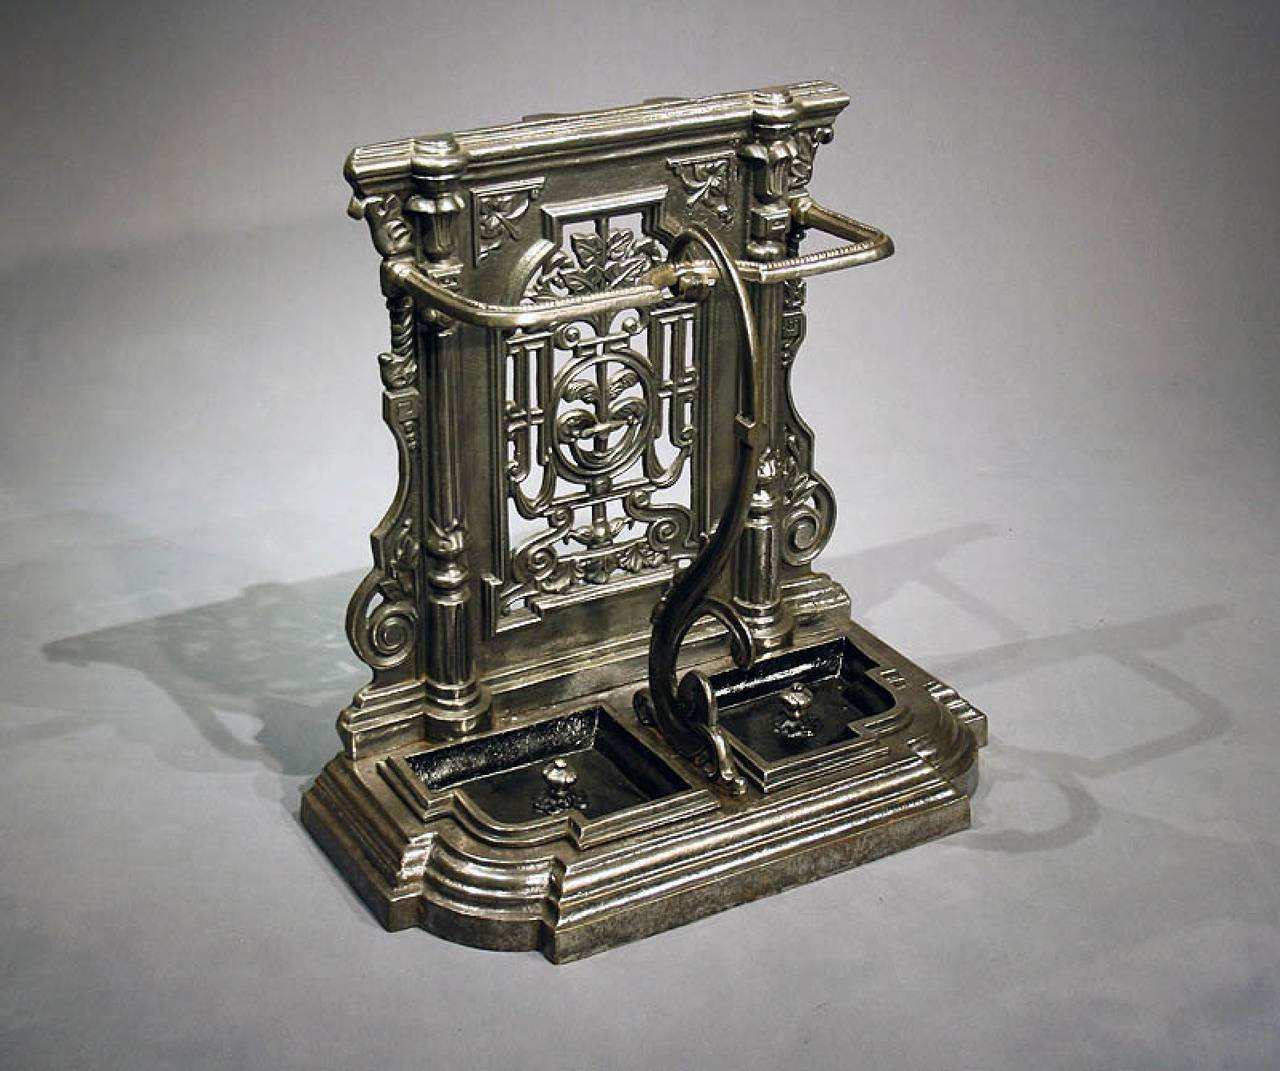 Quality shaped Victorian cast iron stick stand. This Victorian stick/umbrella stand is of the highest quality and has been polished to give a stunning look. The imposing stand is very decoratively carved having a shaped support and removable